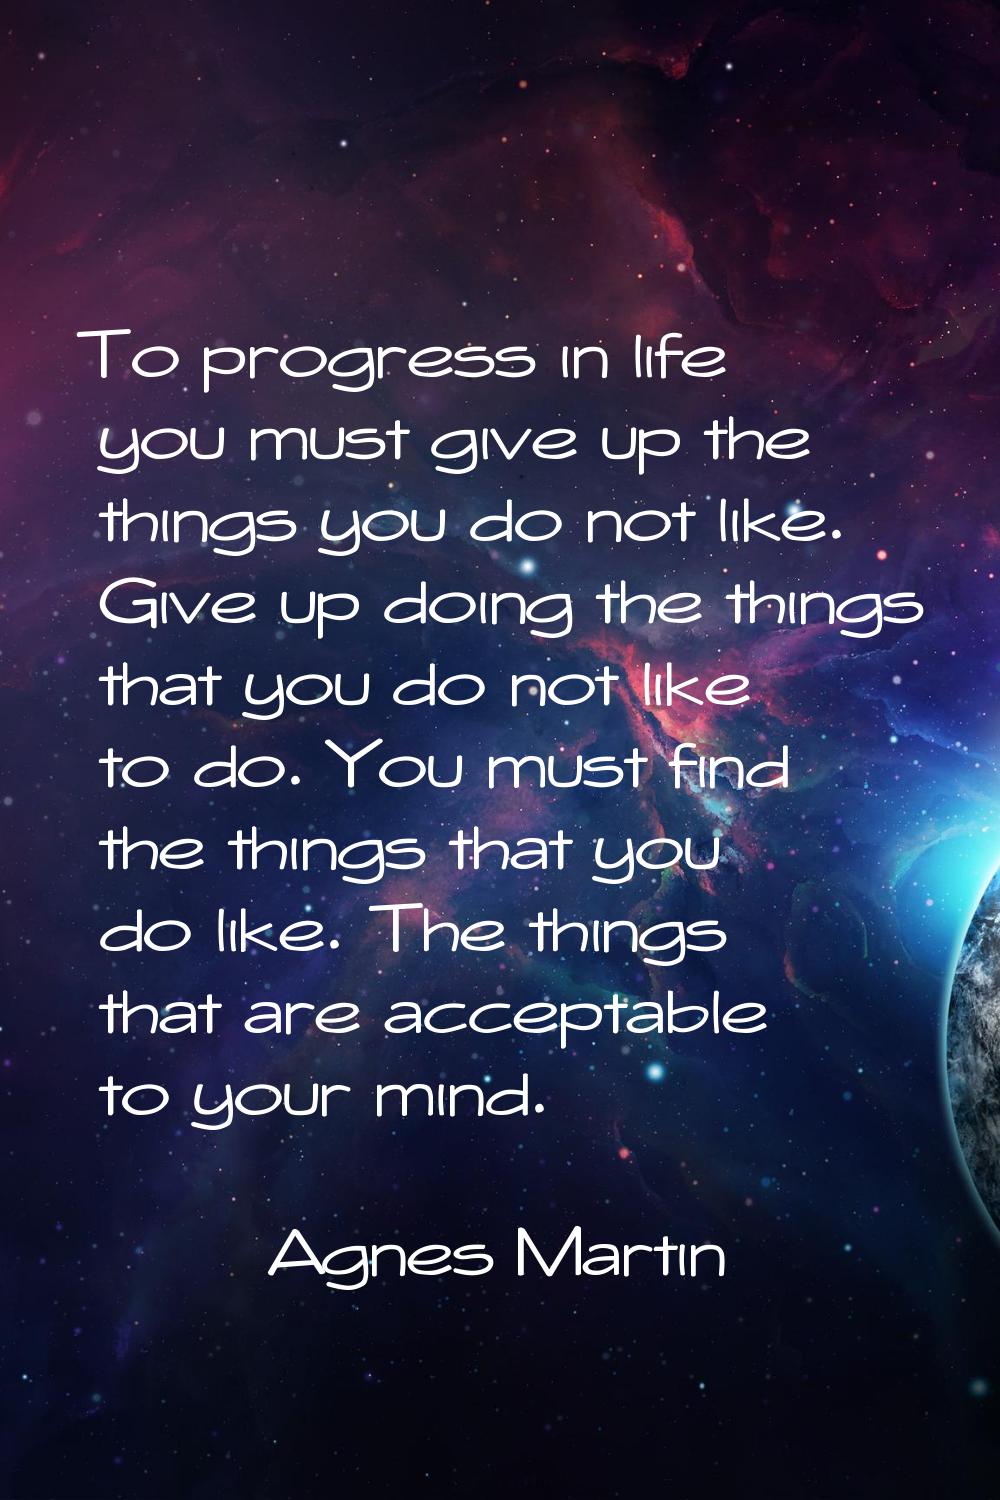 To progress in life you must give up the things you do not like. Give up doing the things that you 